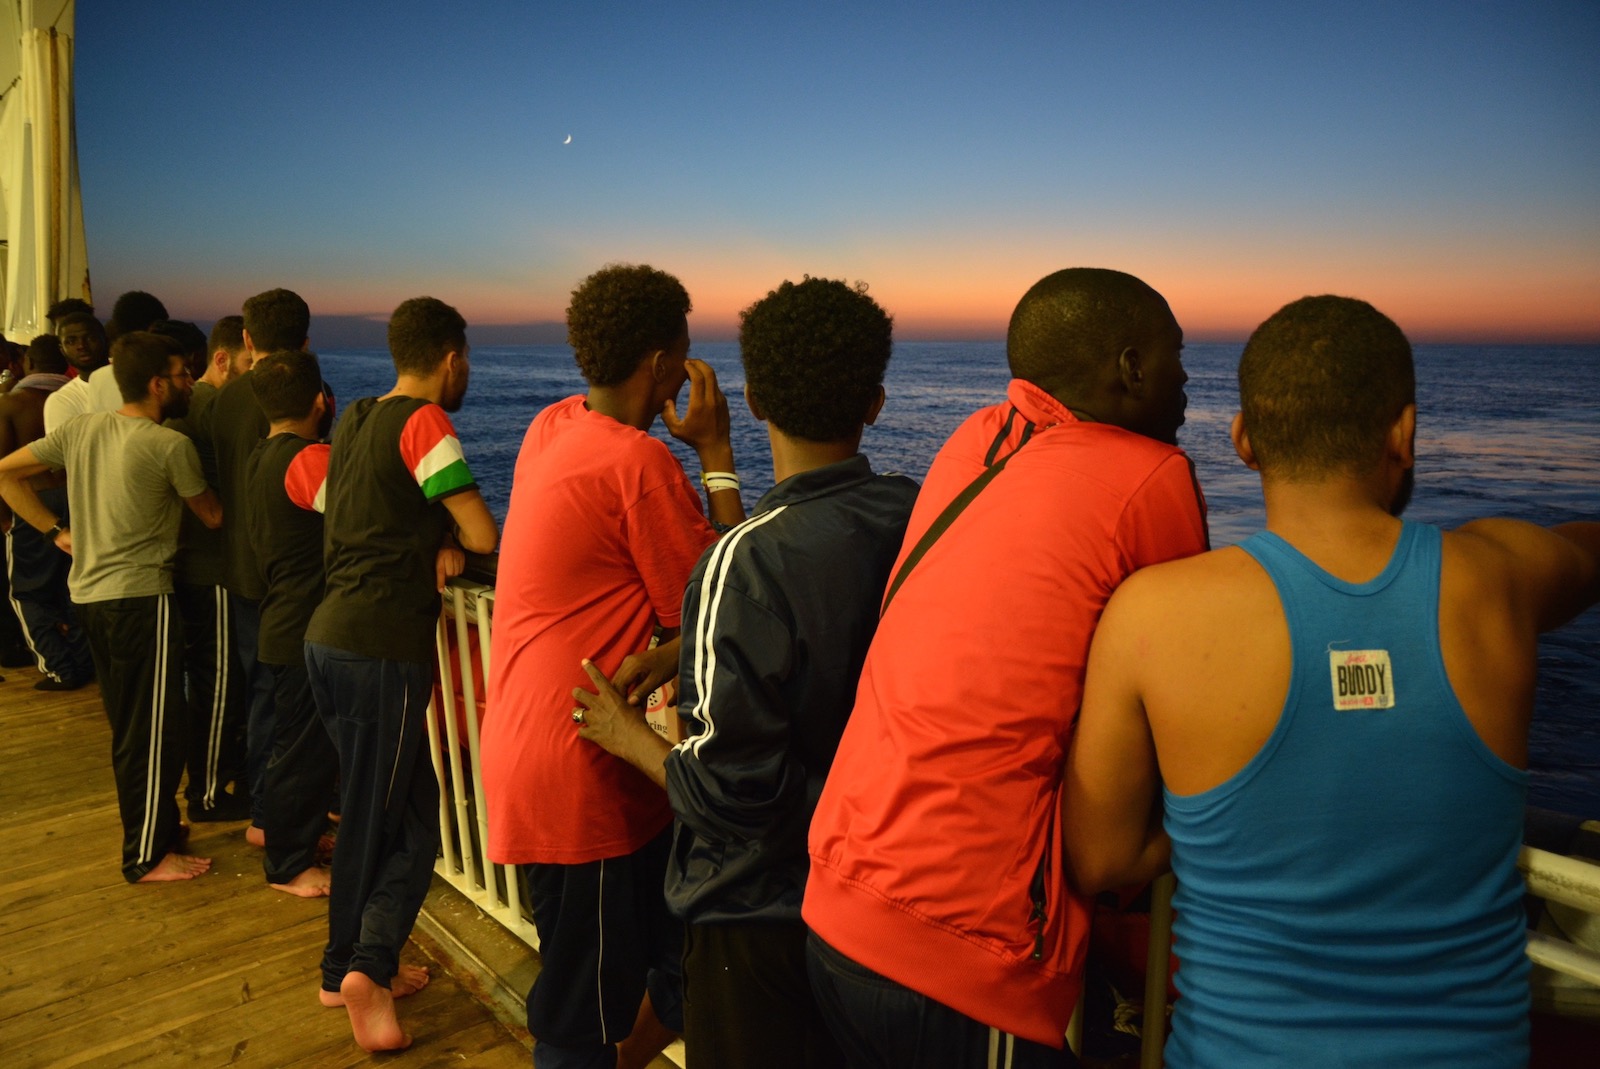 A row of people gathered on the deck of a ship, their backs to the camera, looking out at the sea at dusk